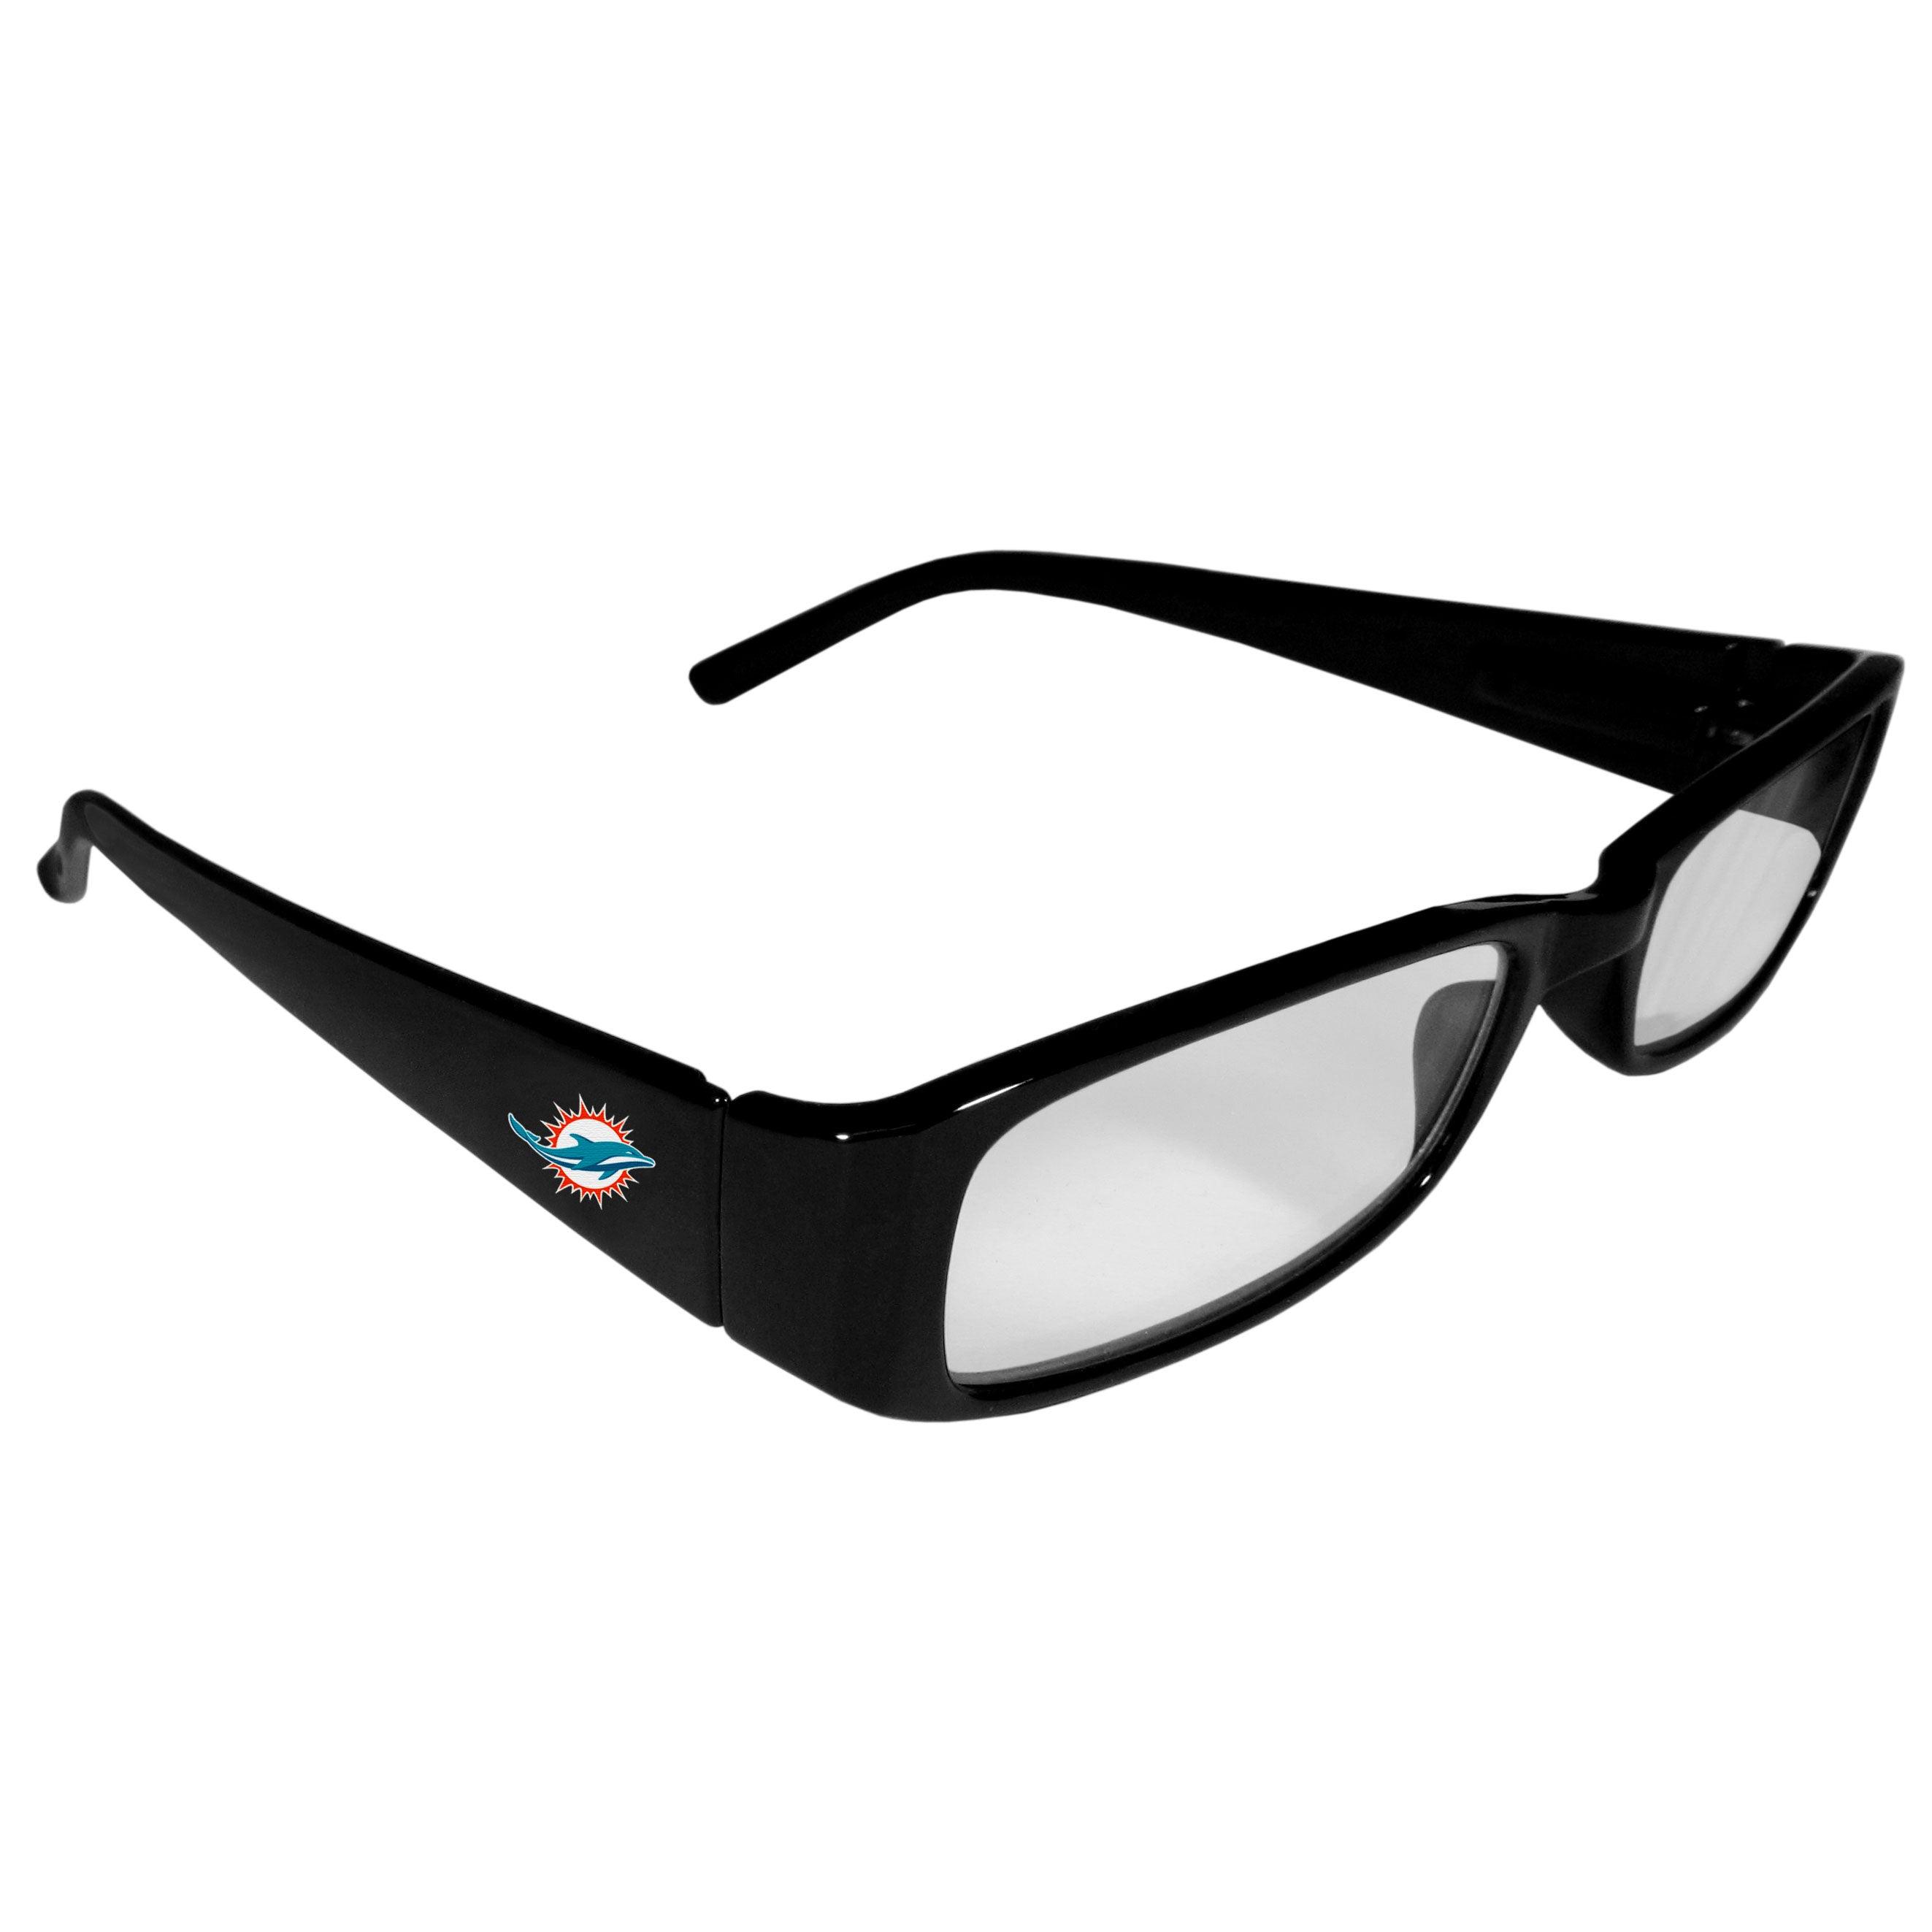 Miami Dolphins Printed Reading Glasses, +1.25 - Flyclothing LLC